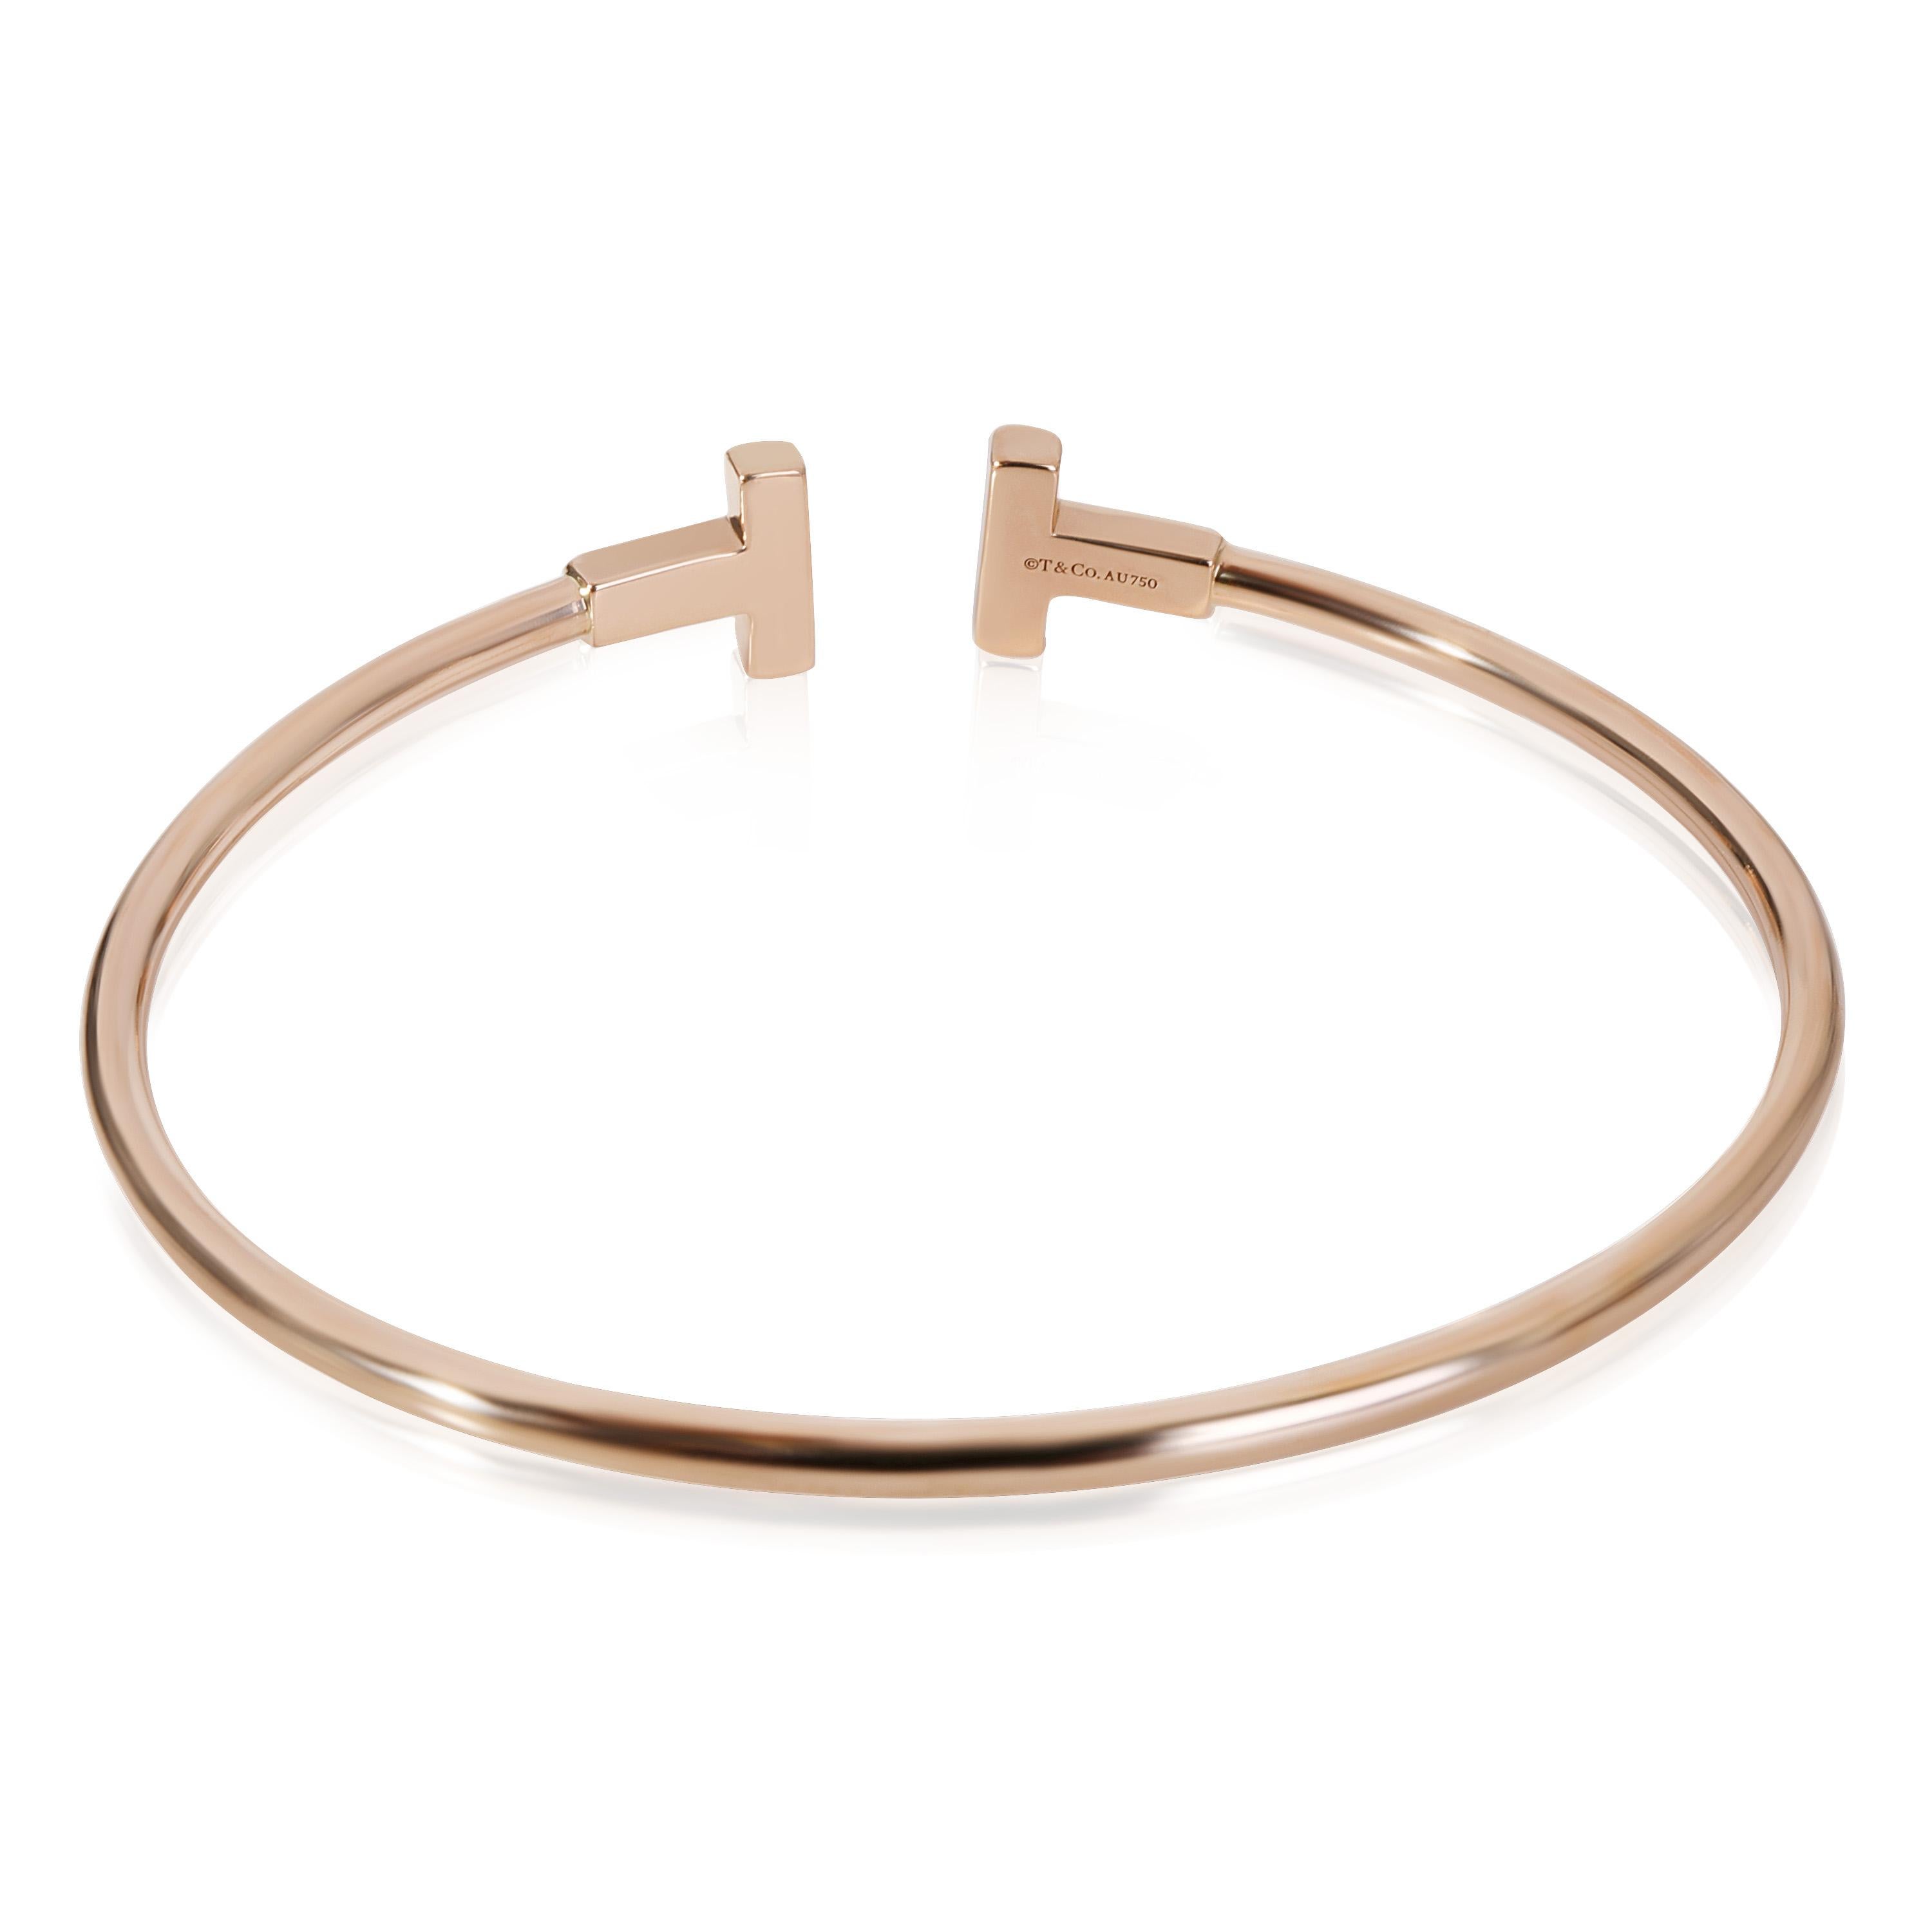 Tiffany & Co.T Wire Bracelet in 18K Rose Gold Size Medium

PRIMARY DETAILS
SKU: 119158
Listing Title: Tiffany & Co.T Wire Bracelet in 18K Rose Gold Size Medium
Condition Description: Retails for 2200 USD. In excellent condition and recently